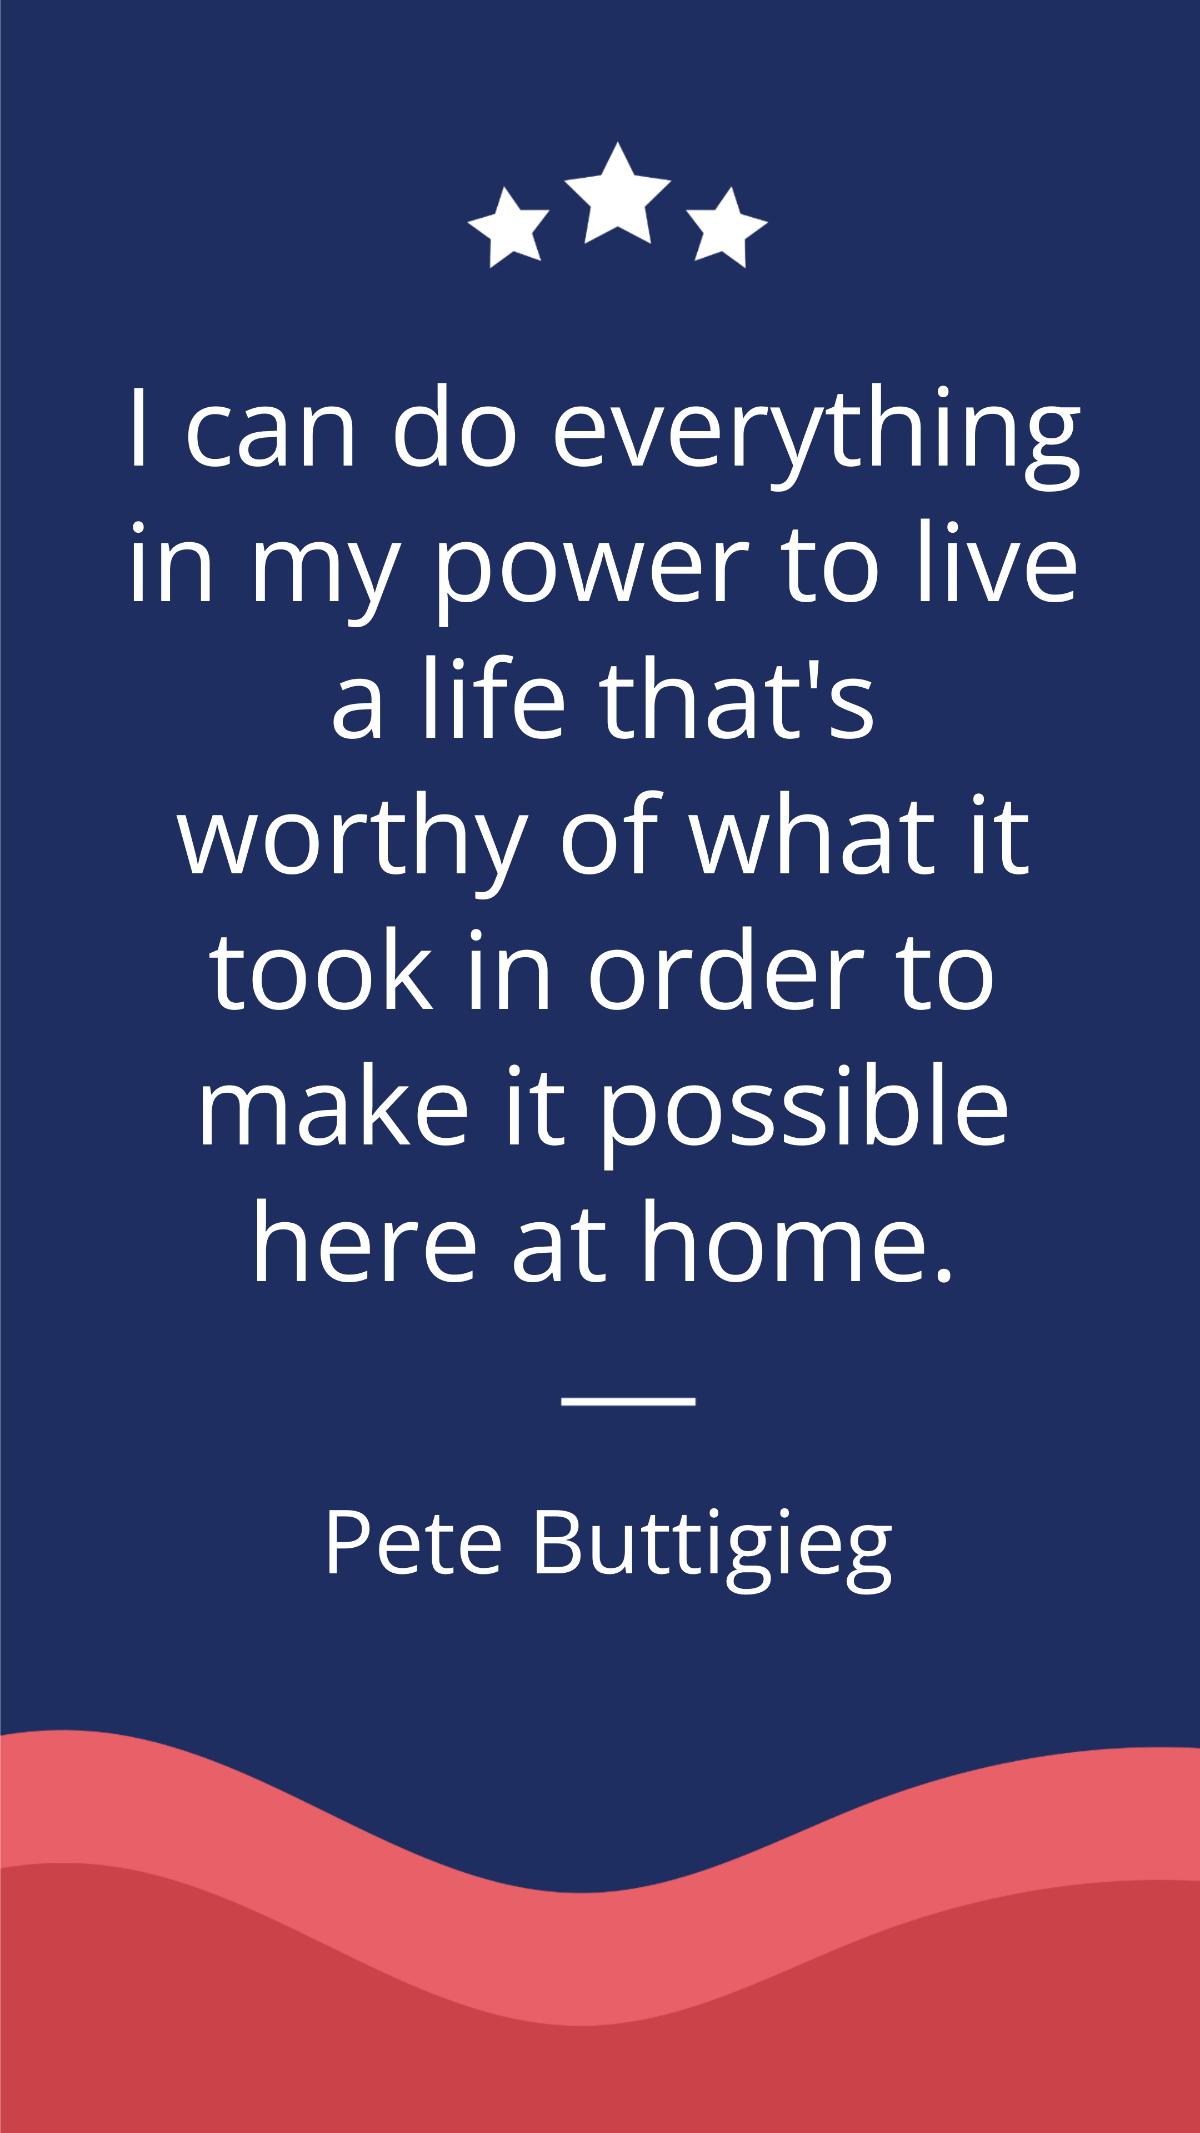 Pete Buttigieg - I can do everything in my power to live a life that's worthy of what it took in order to make it possible to be here at home.